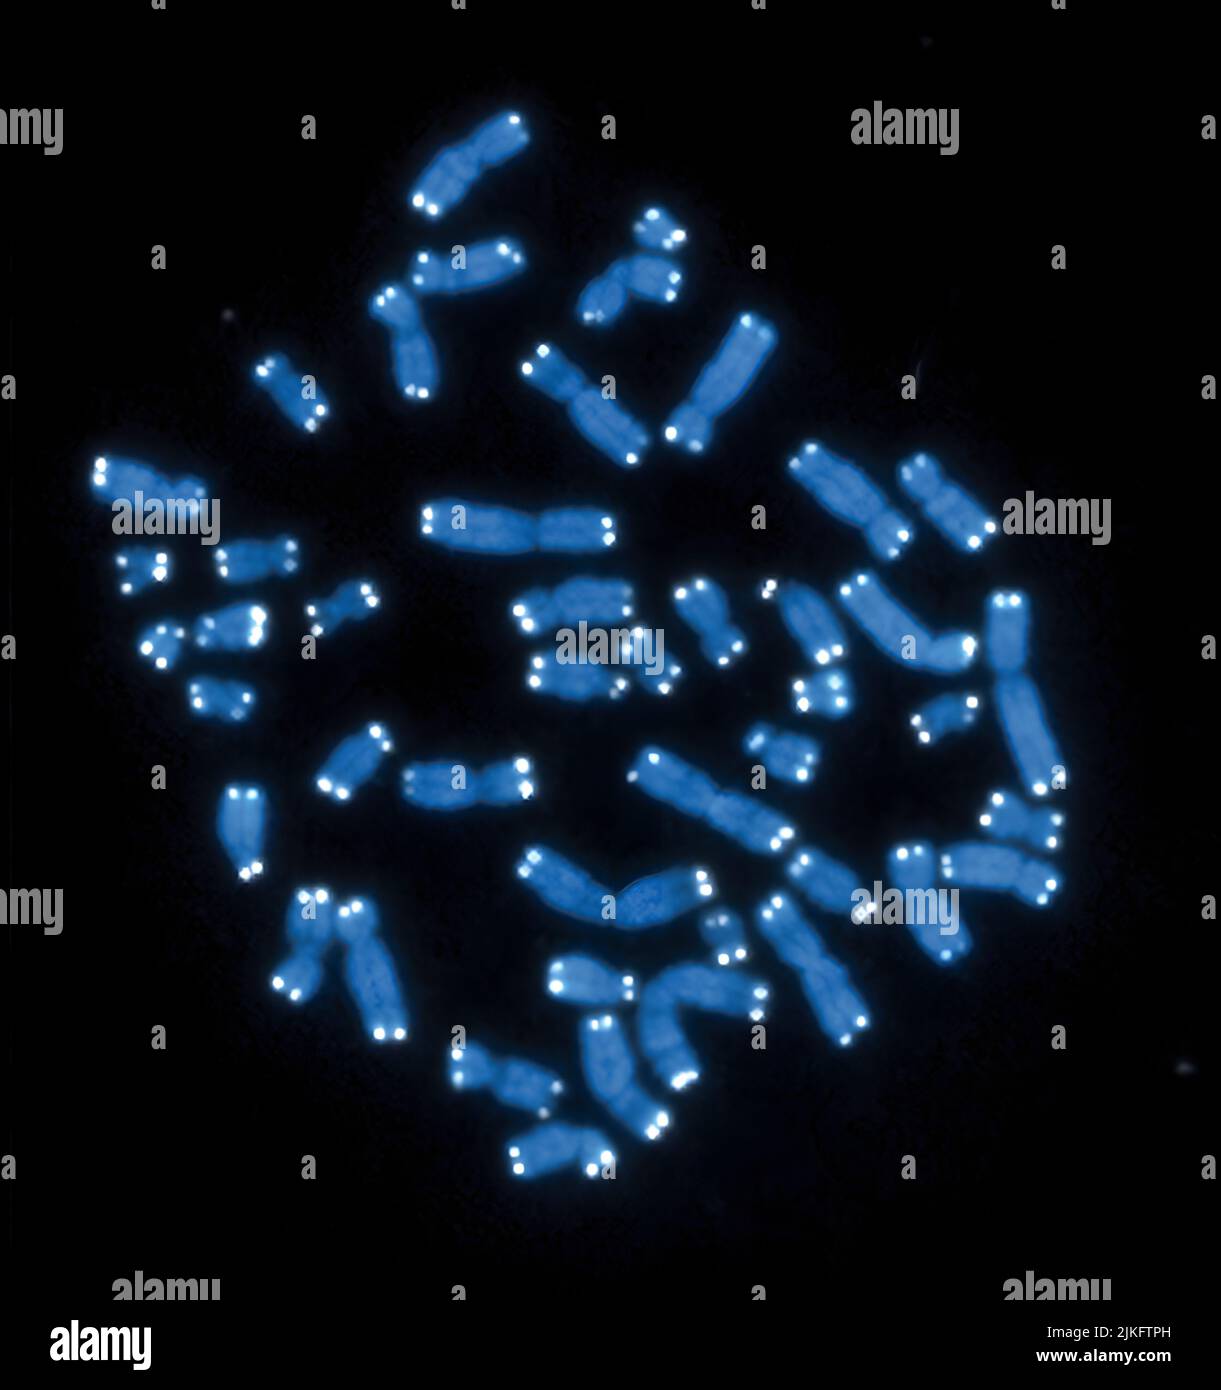 The 46 human chromosomes are shown in blue, with telomeres appearing as white dots. The DNA has already been copied, so each chromosome is actually made up of two identical lengths of DNA, each with its own two telomeres. Stock Photo